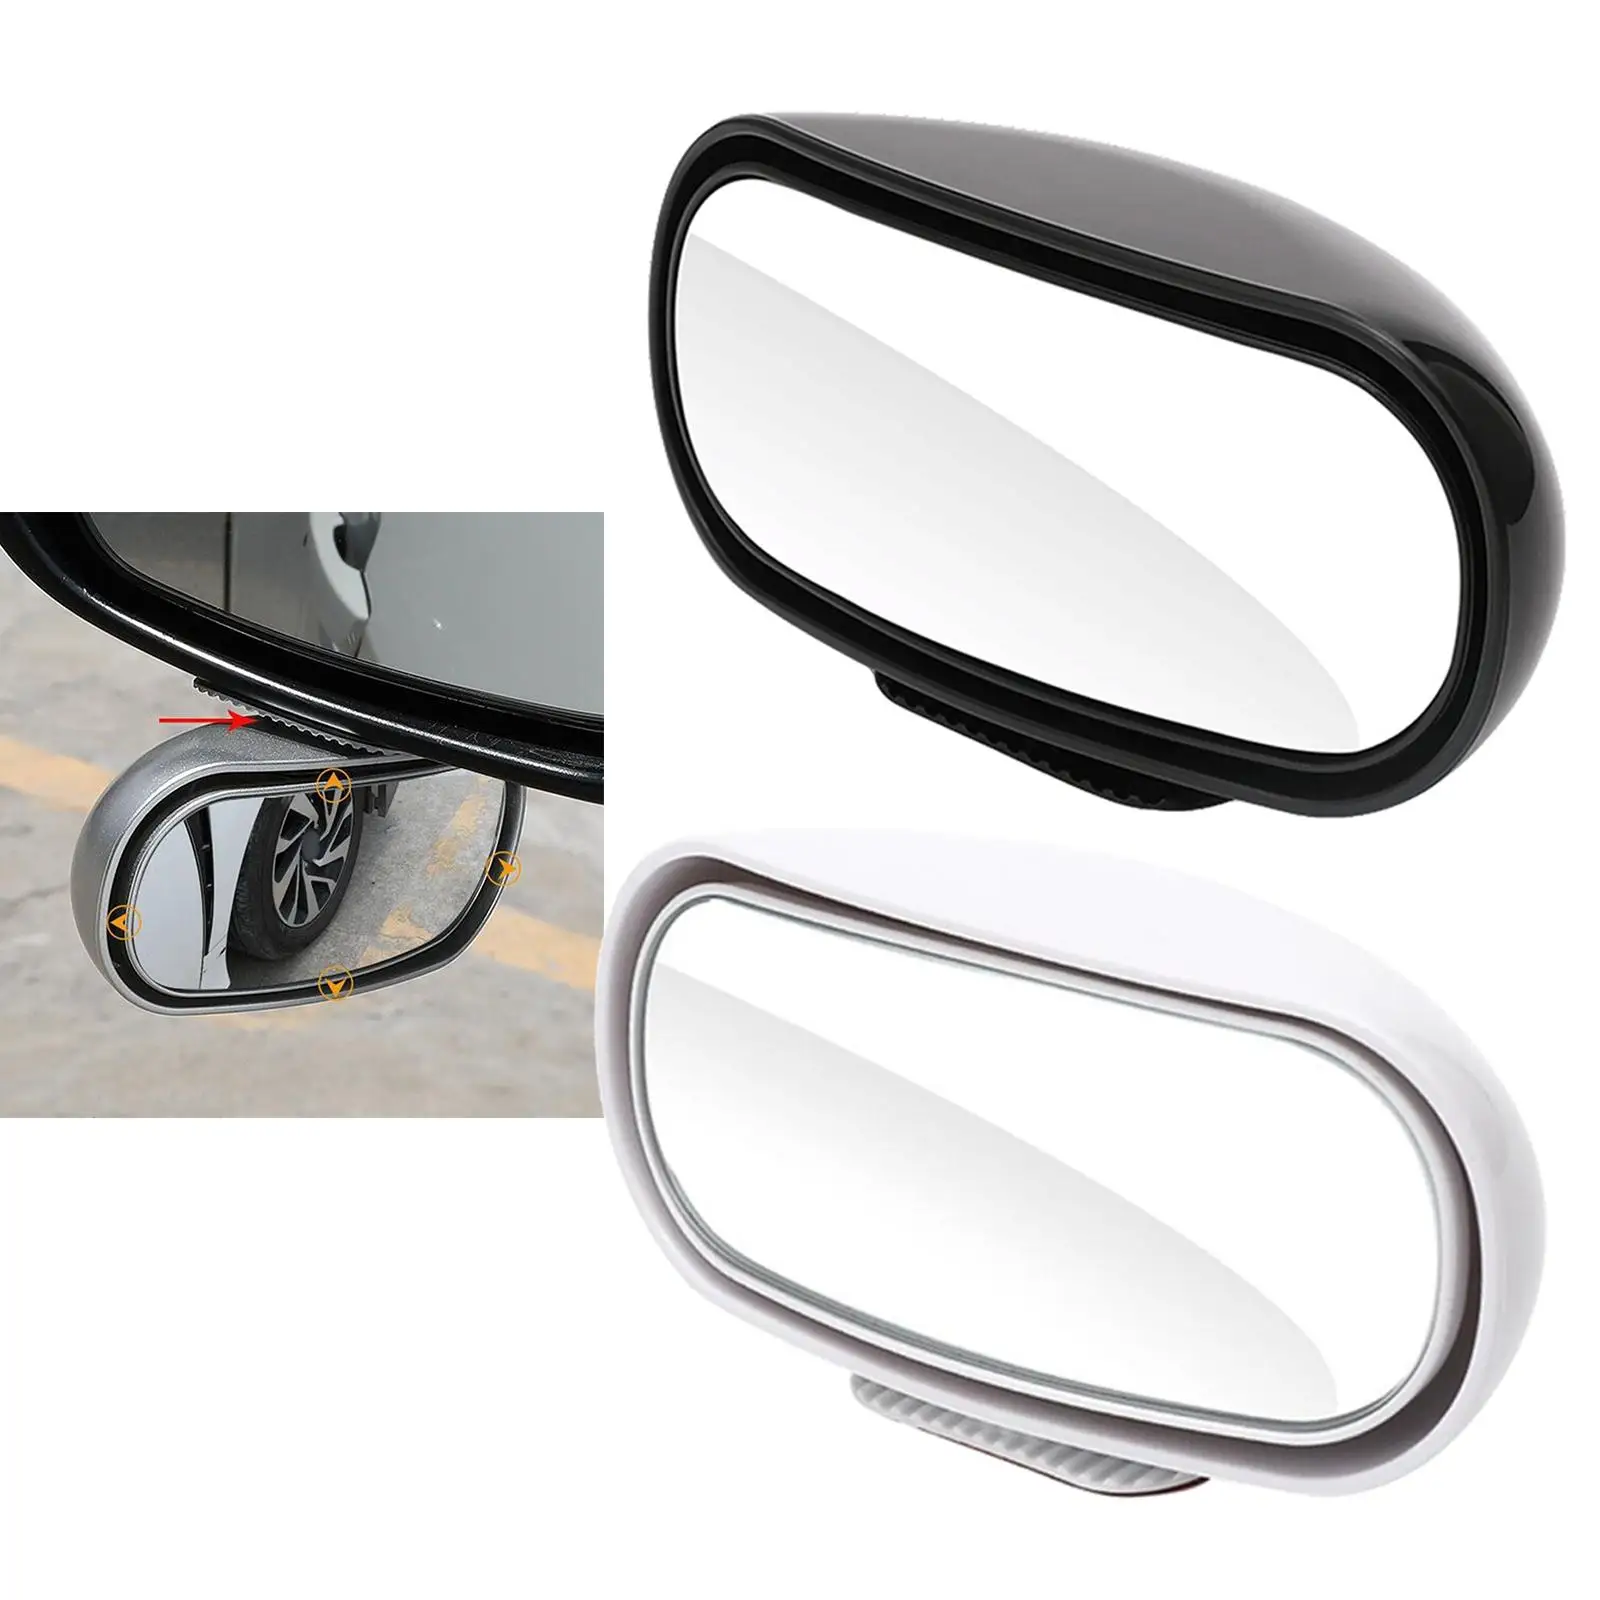 Universal HD360 Car Wide Angle Convex Rear Side View Blind Spot Mirror